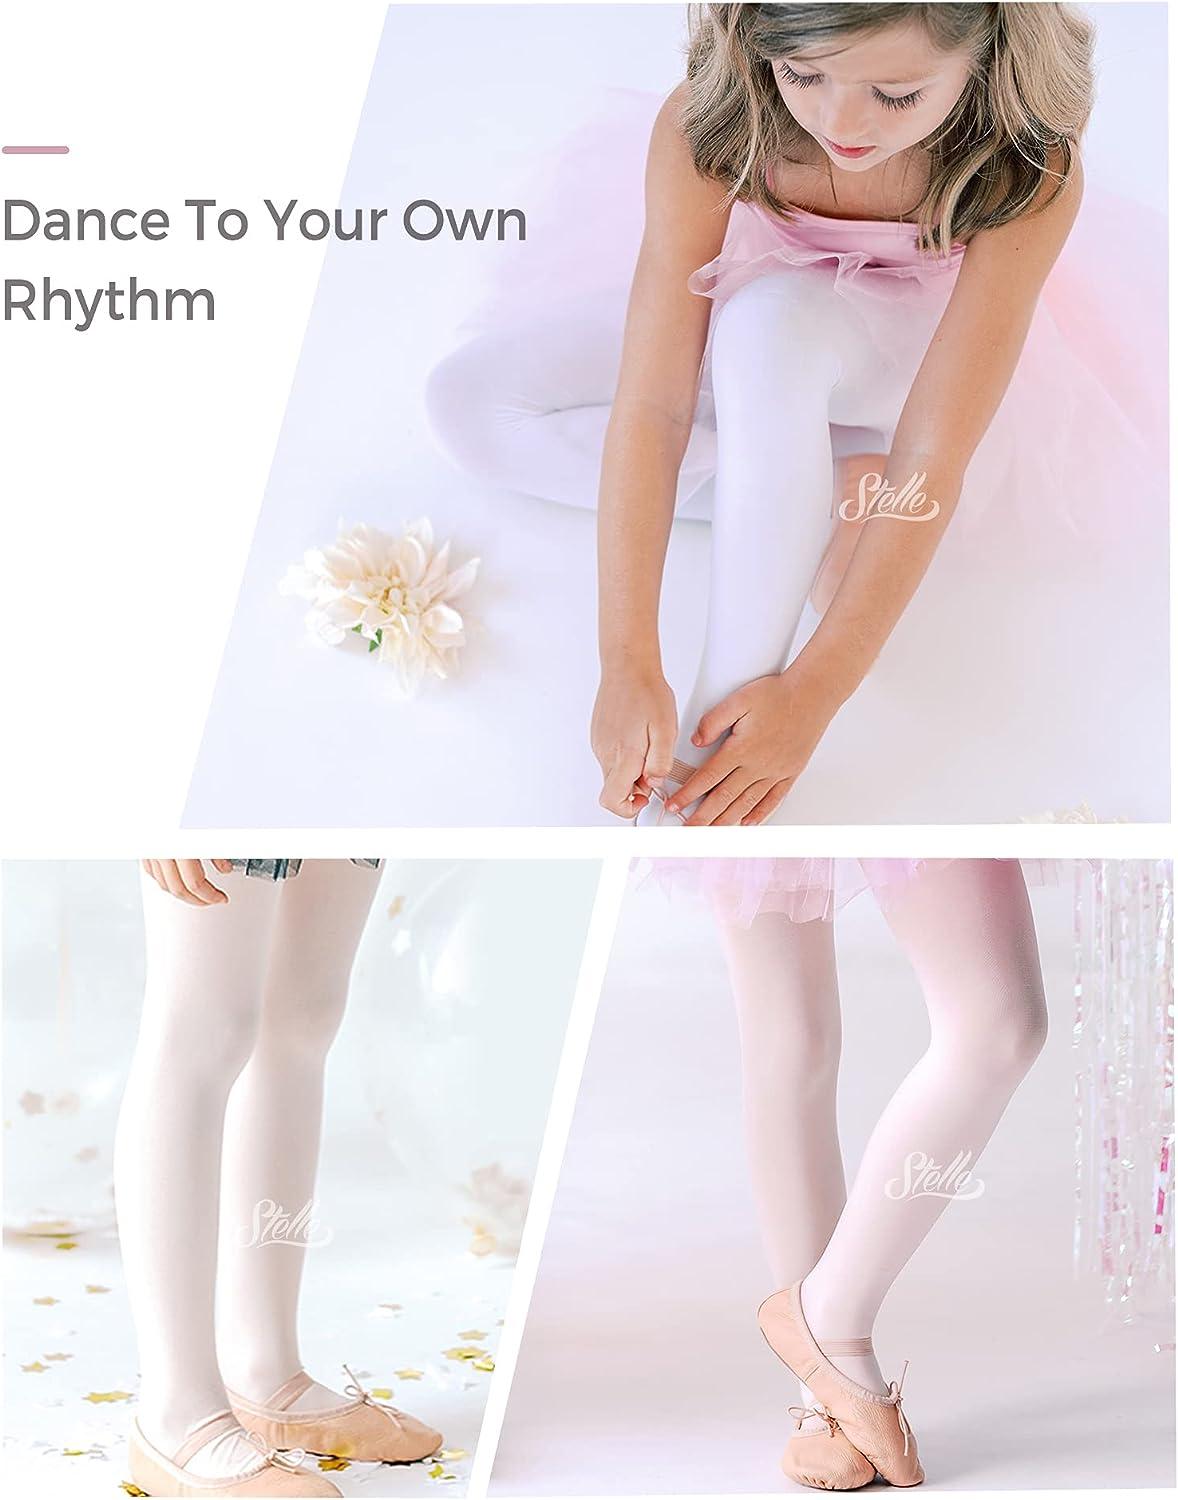  Stretchy Pink Ballet Tights For Girls 6-8 Ultra